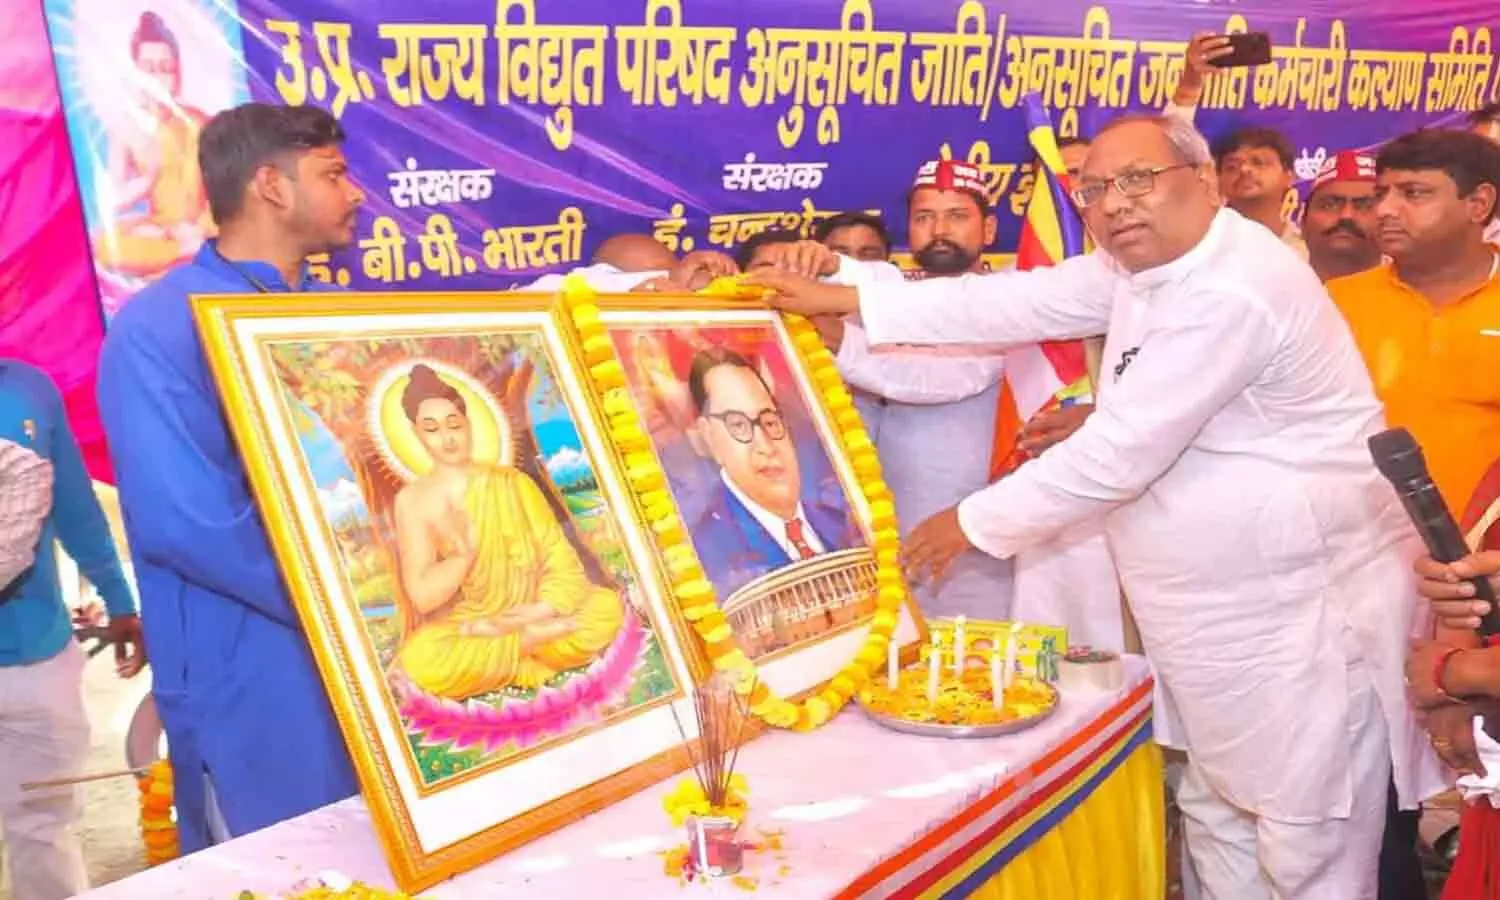 Minister Sanjay Nishad bowed down to Babasaheb, said - the country is moving ahead on the path shown by Ambedkar